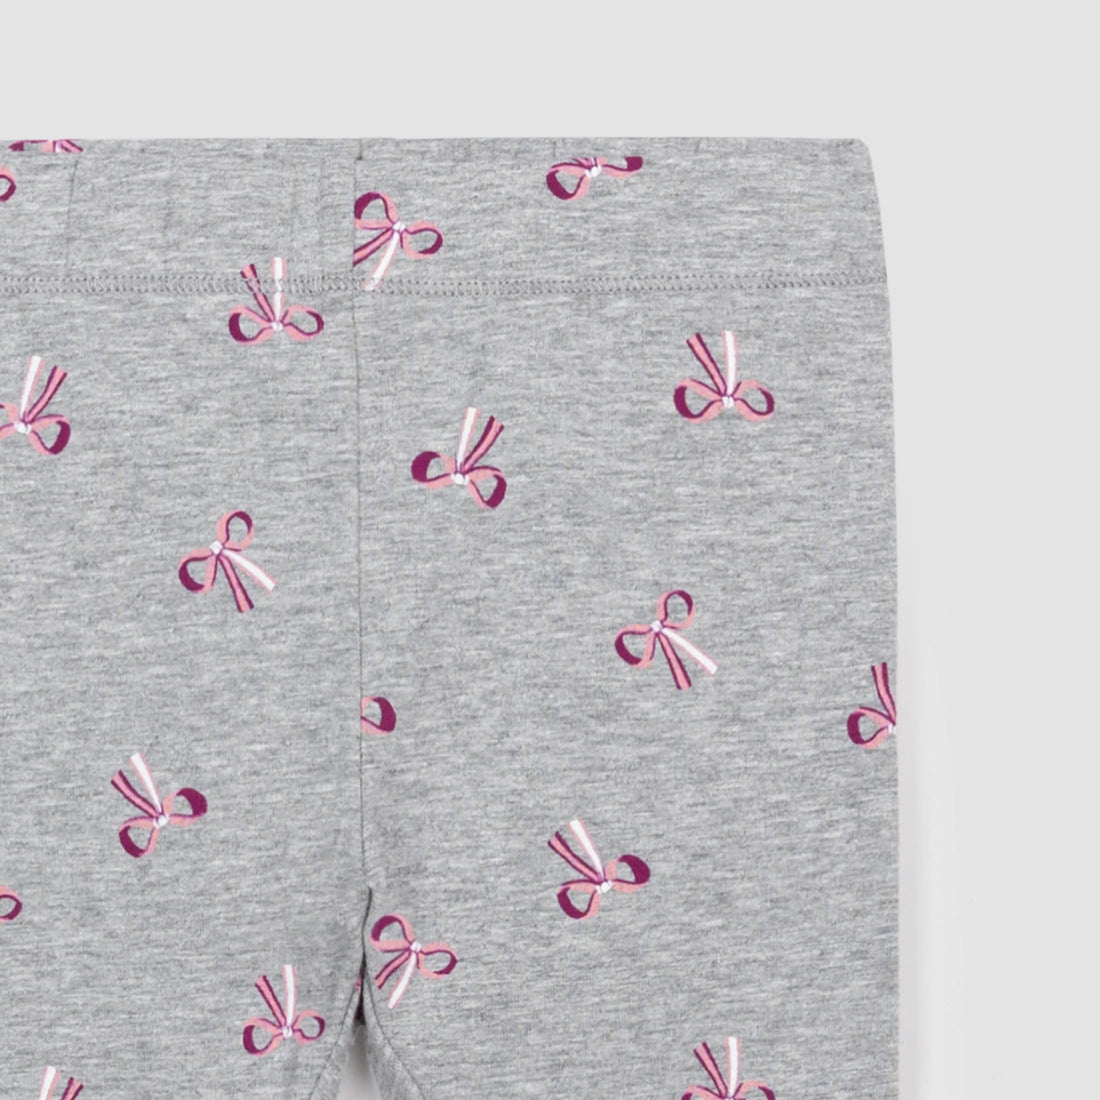 grey leggings with pink ribbon bows all over